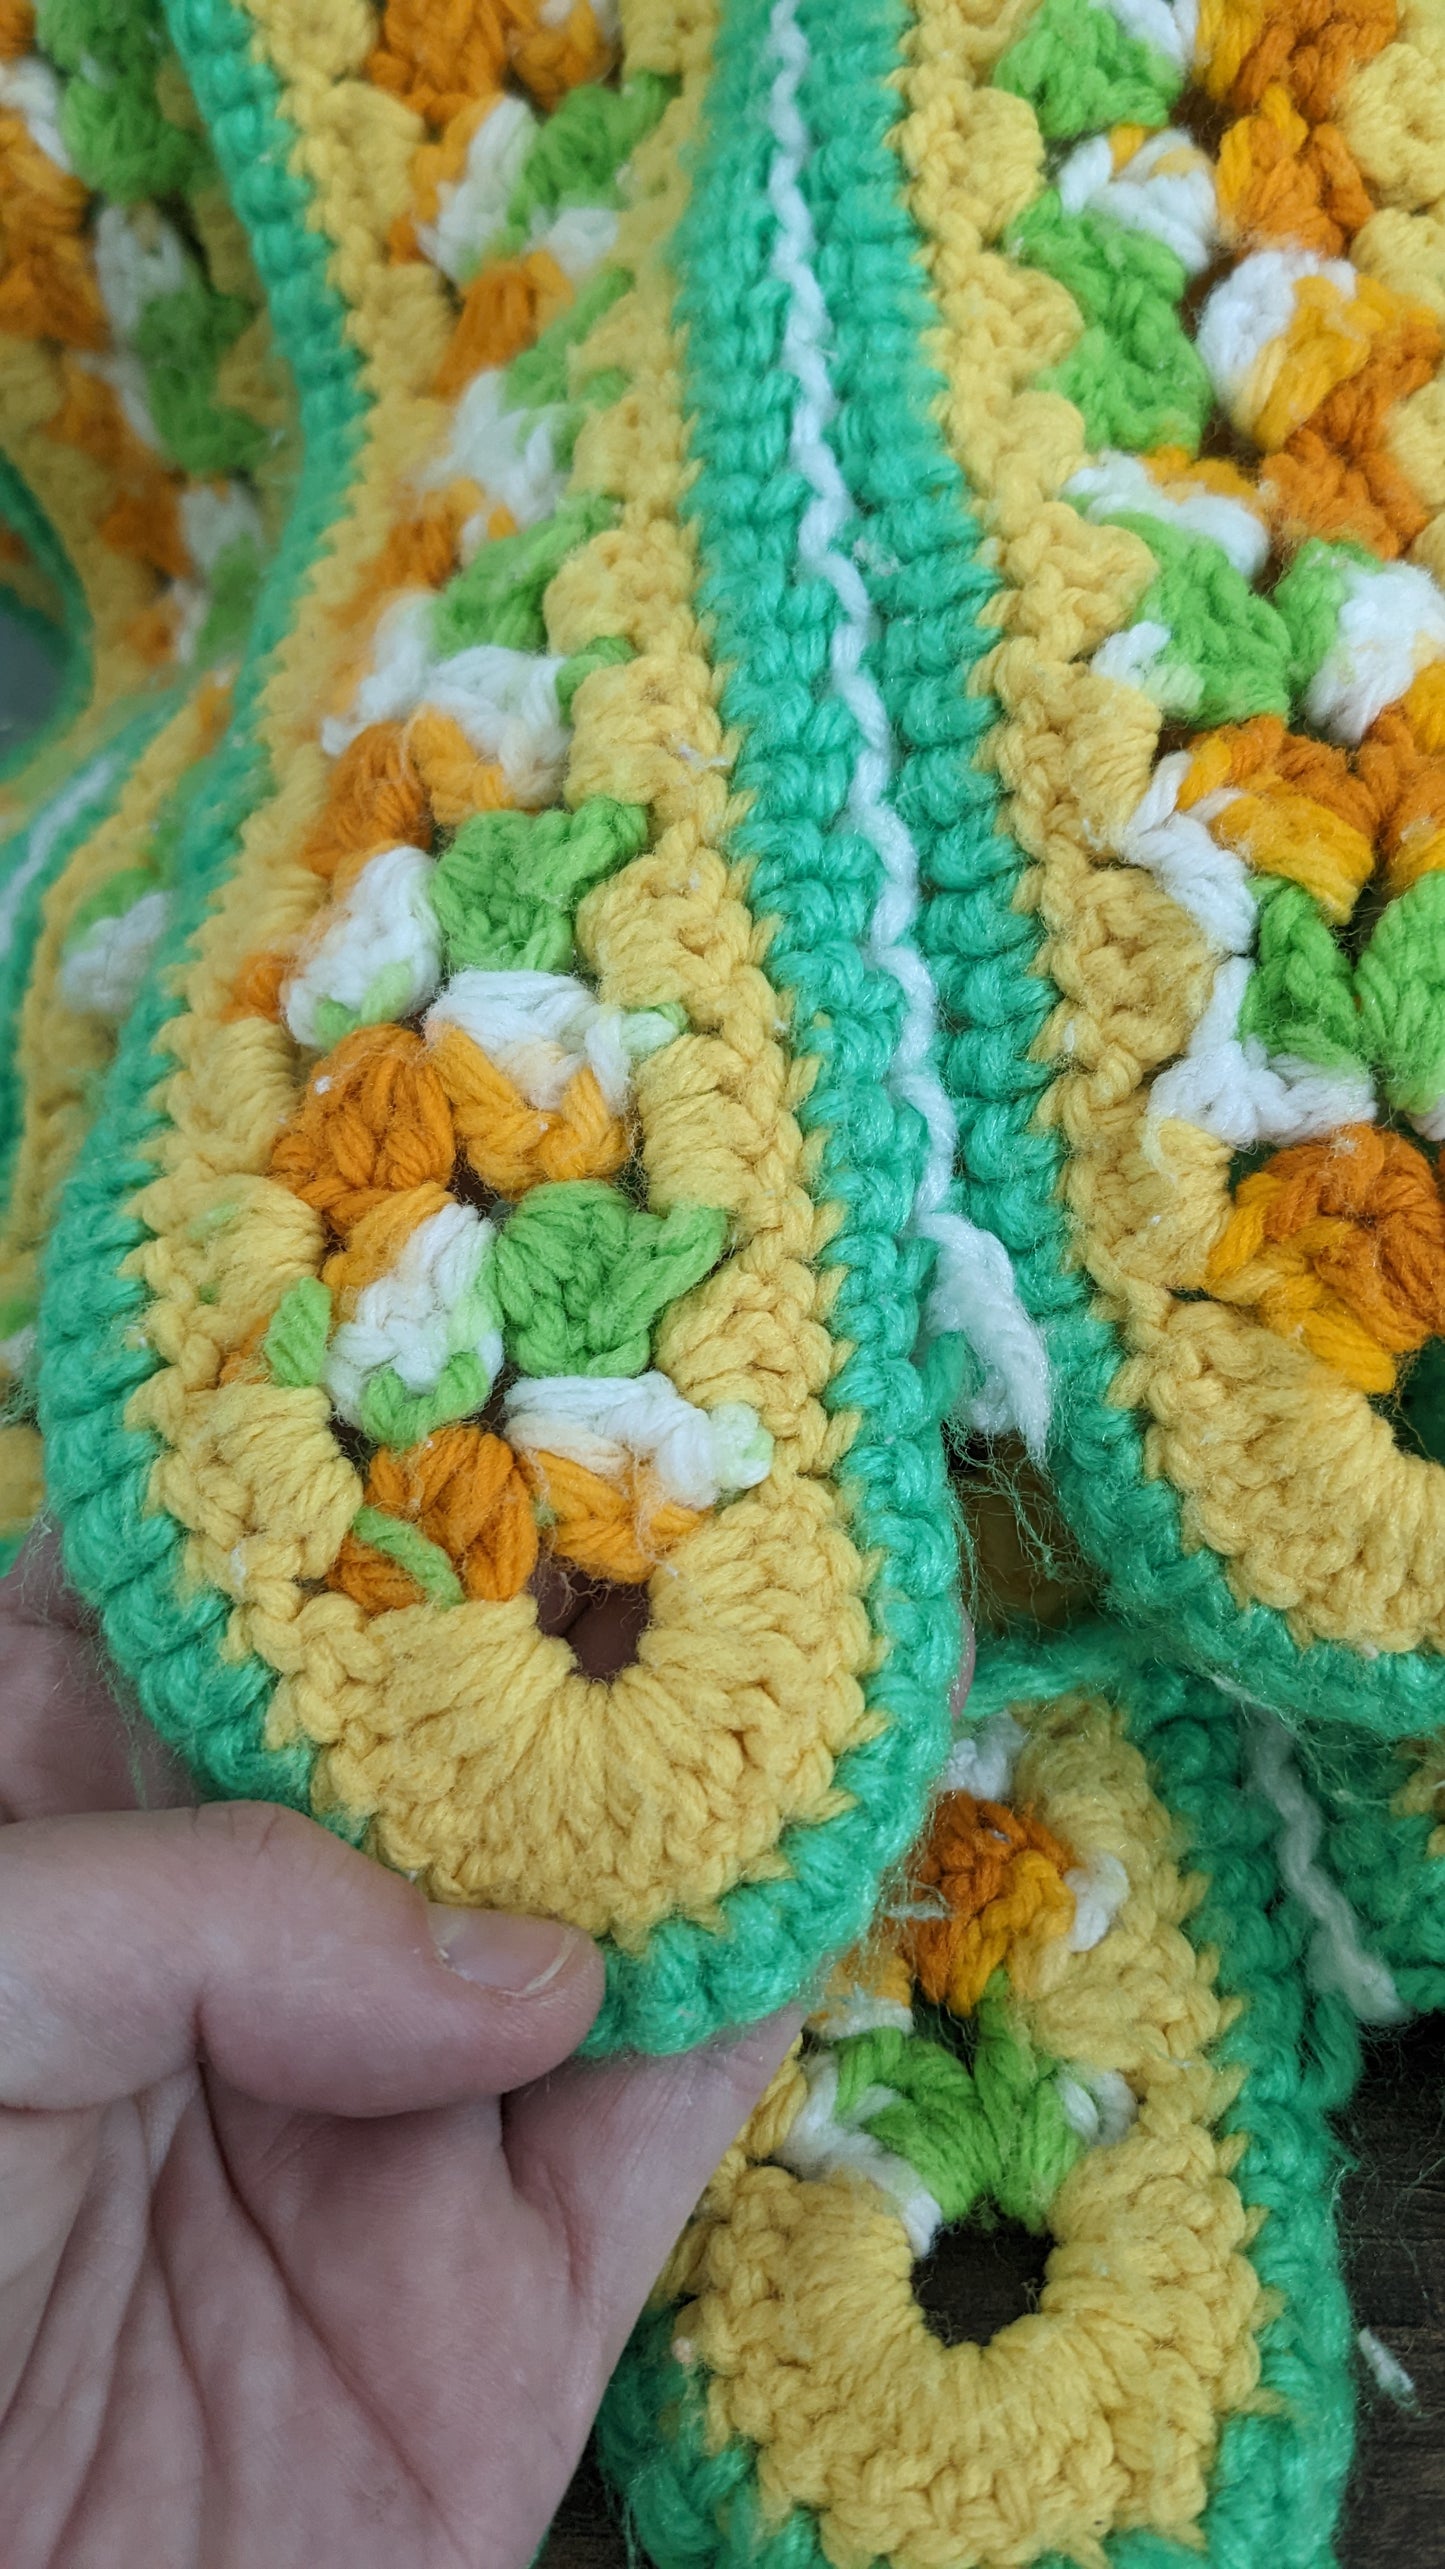 HandMade Yellow, Green, White and Orange Striped Afghan with Loops 76"x57"